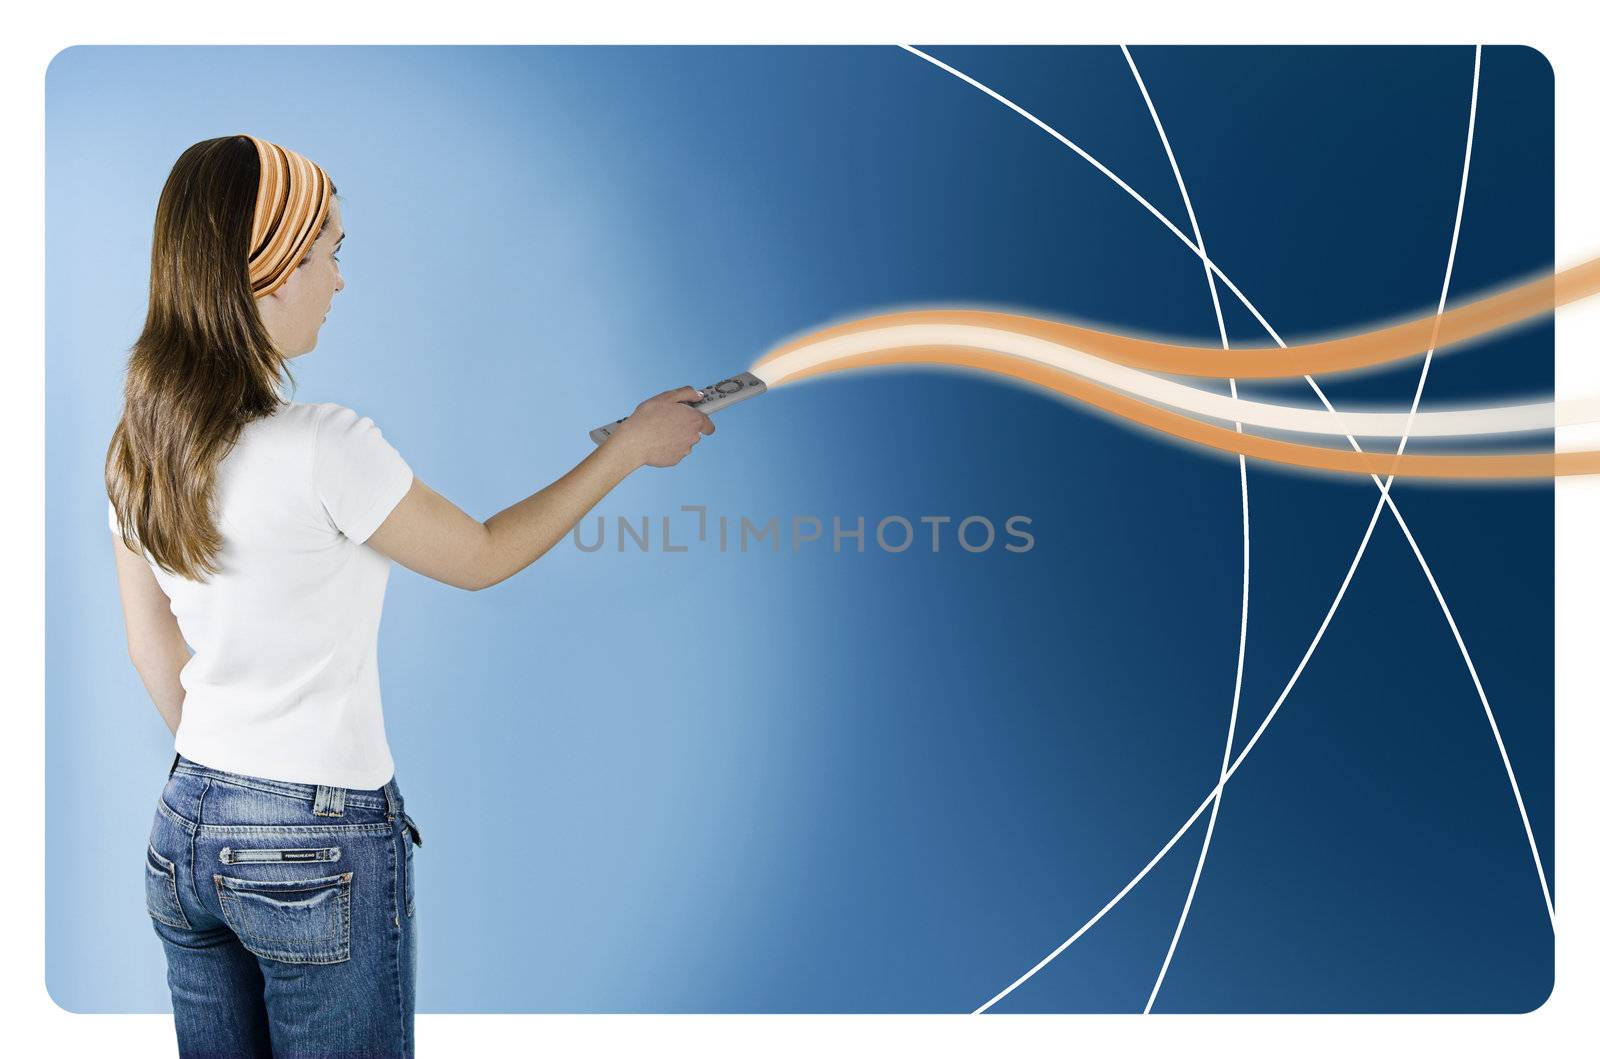 Woman with a remote control over a blue background created in PS